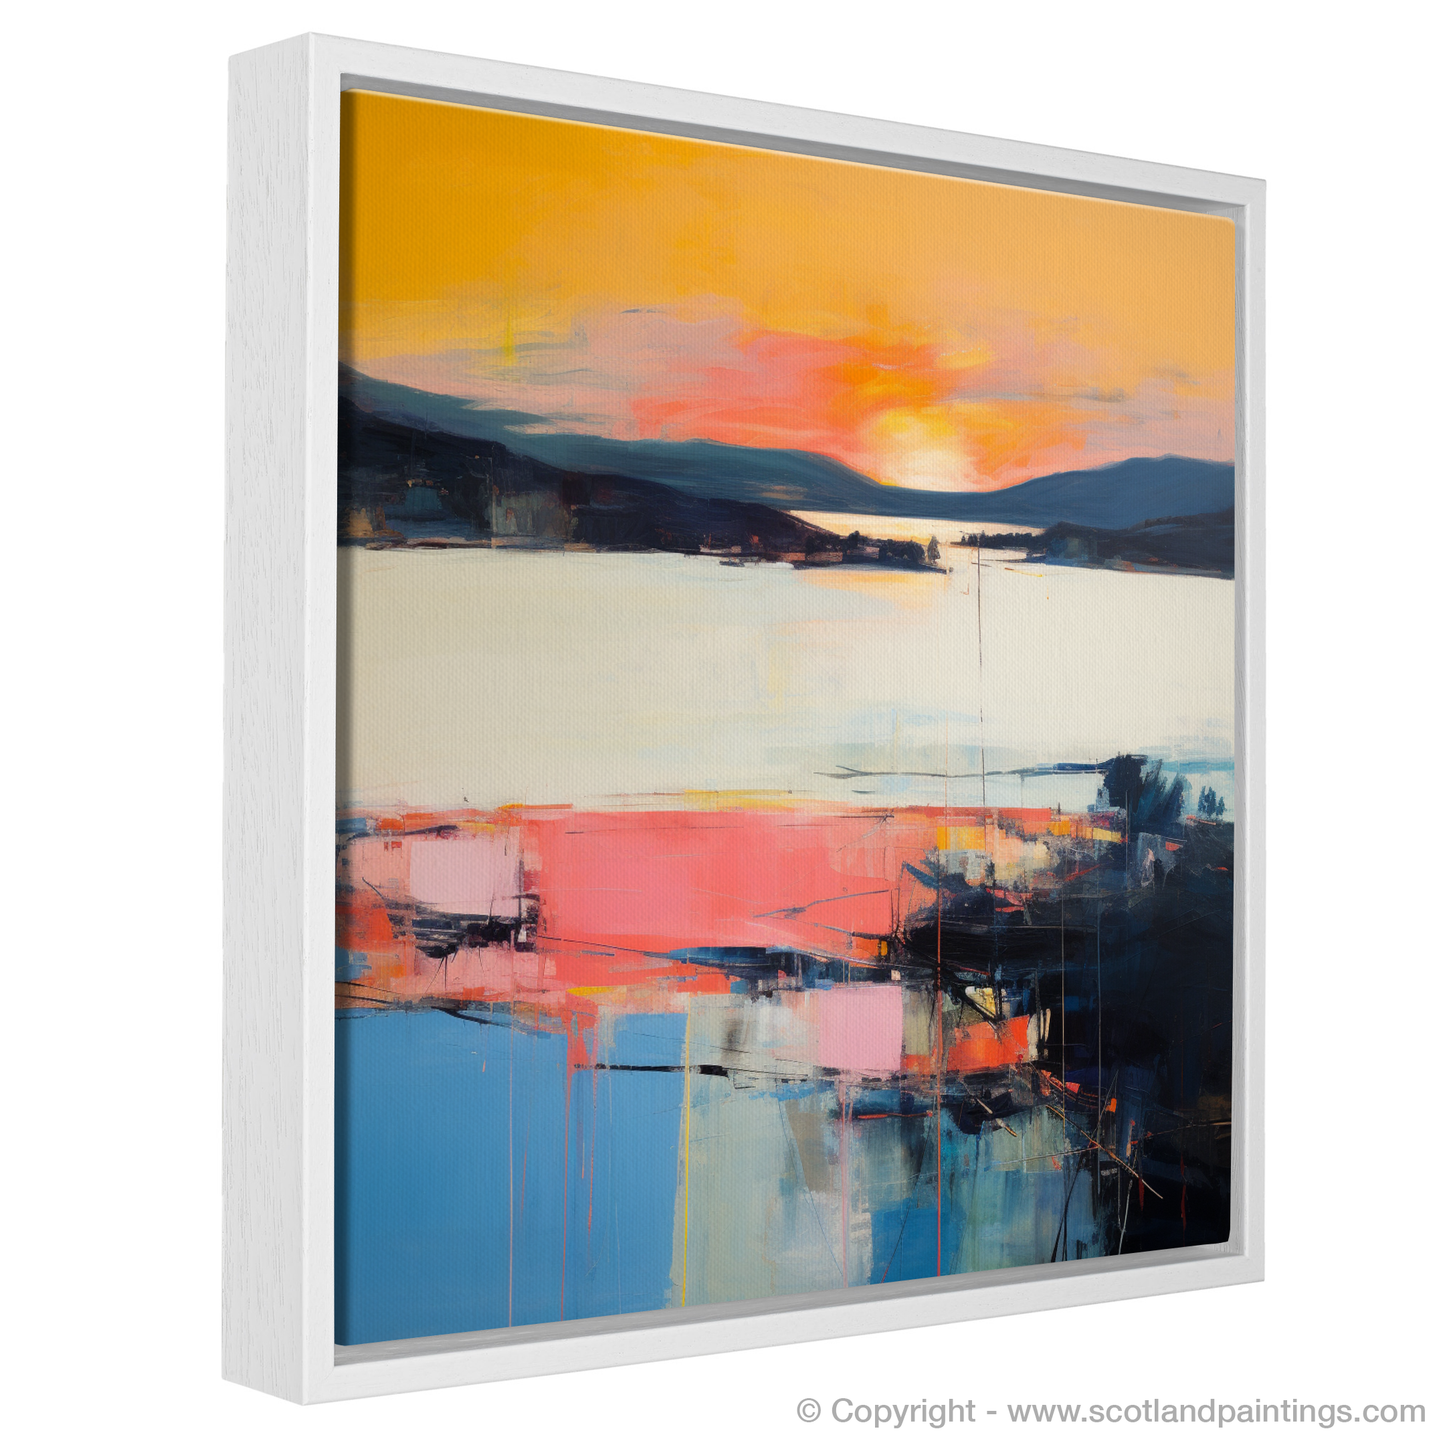 Painting and Art Print of Sunset over Loch Lomond entitled "Sunset Serenade over Loch Lomond".